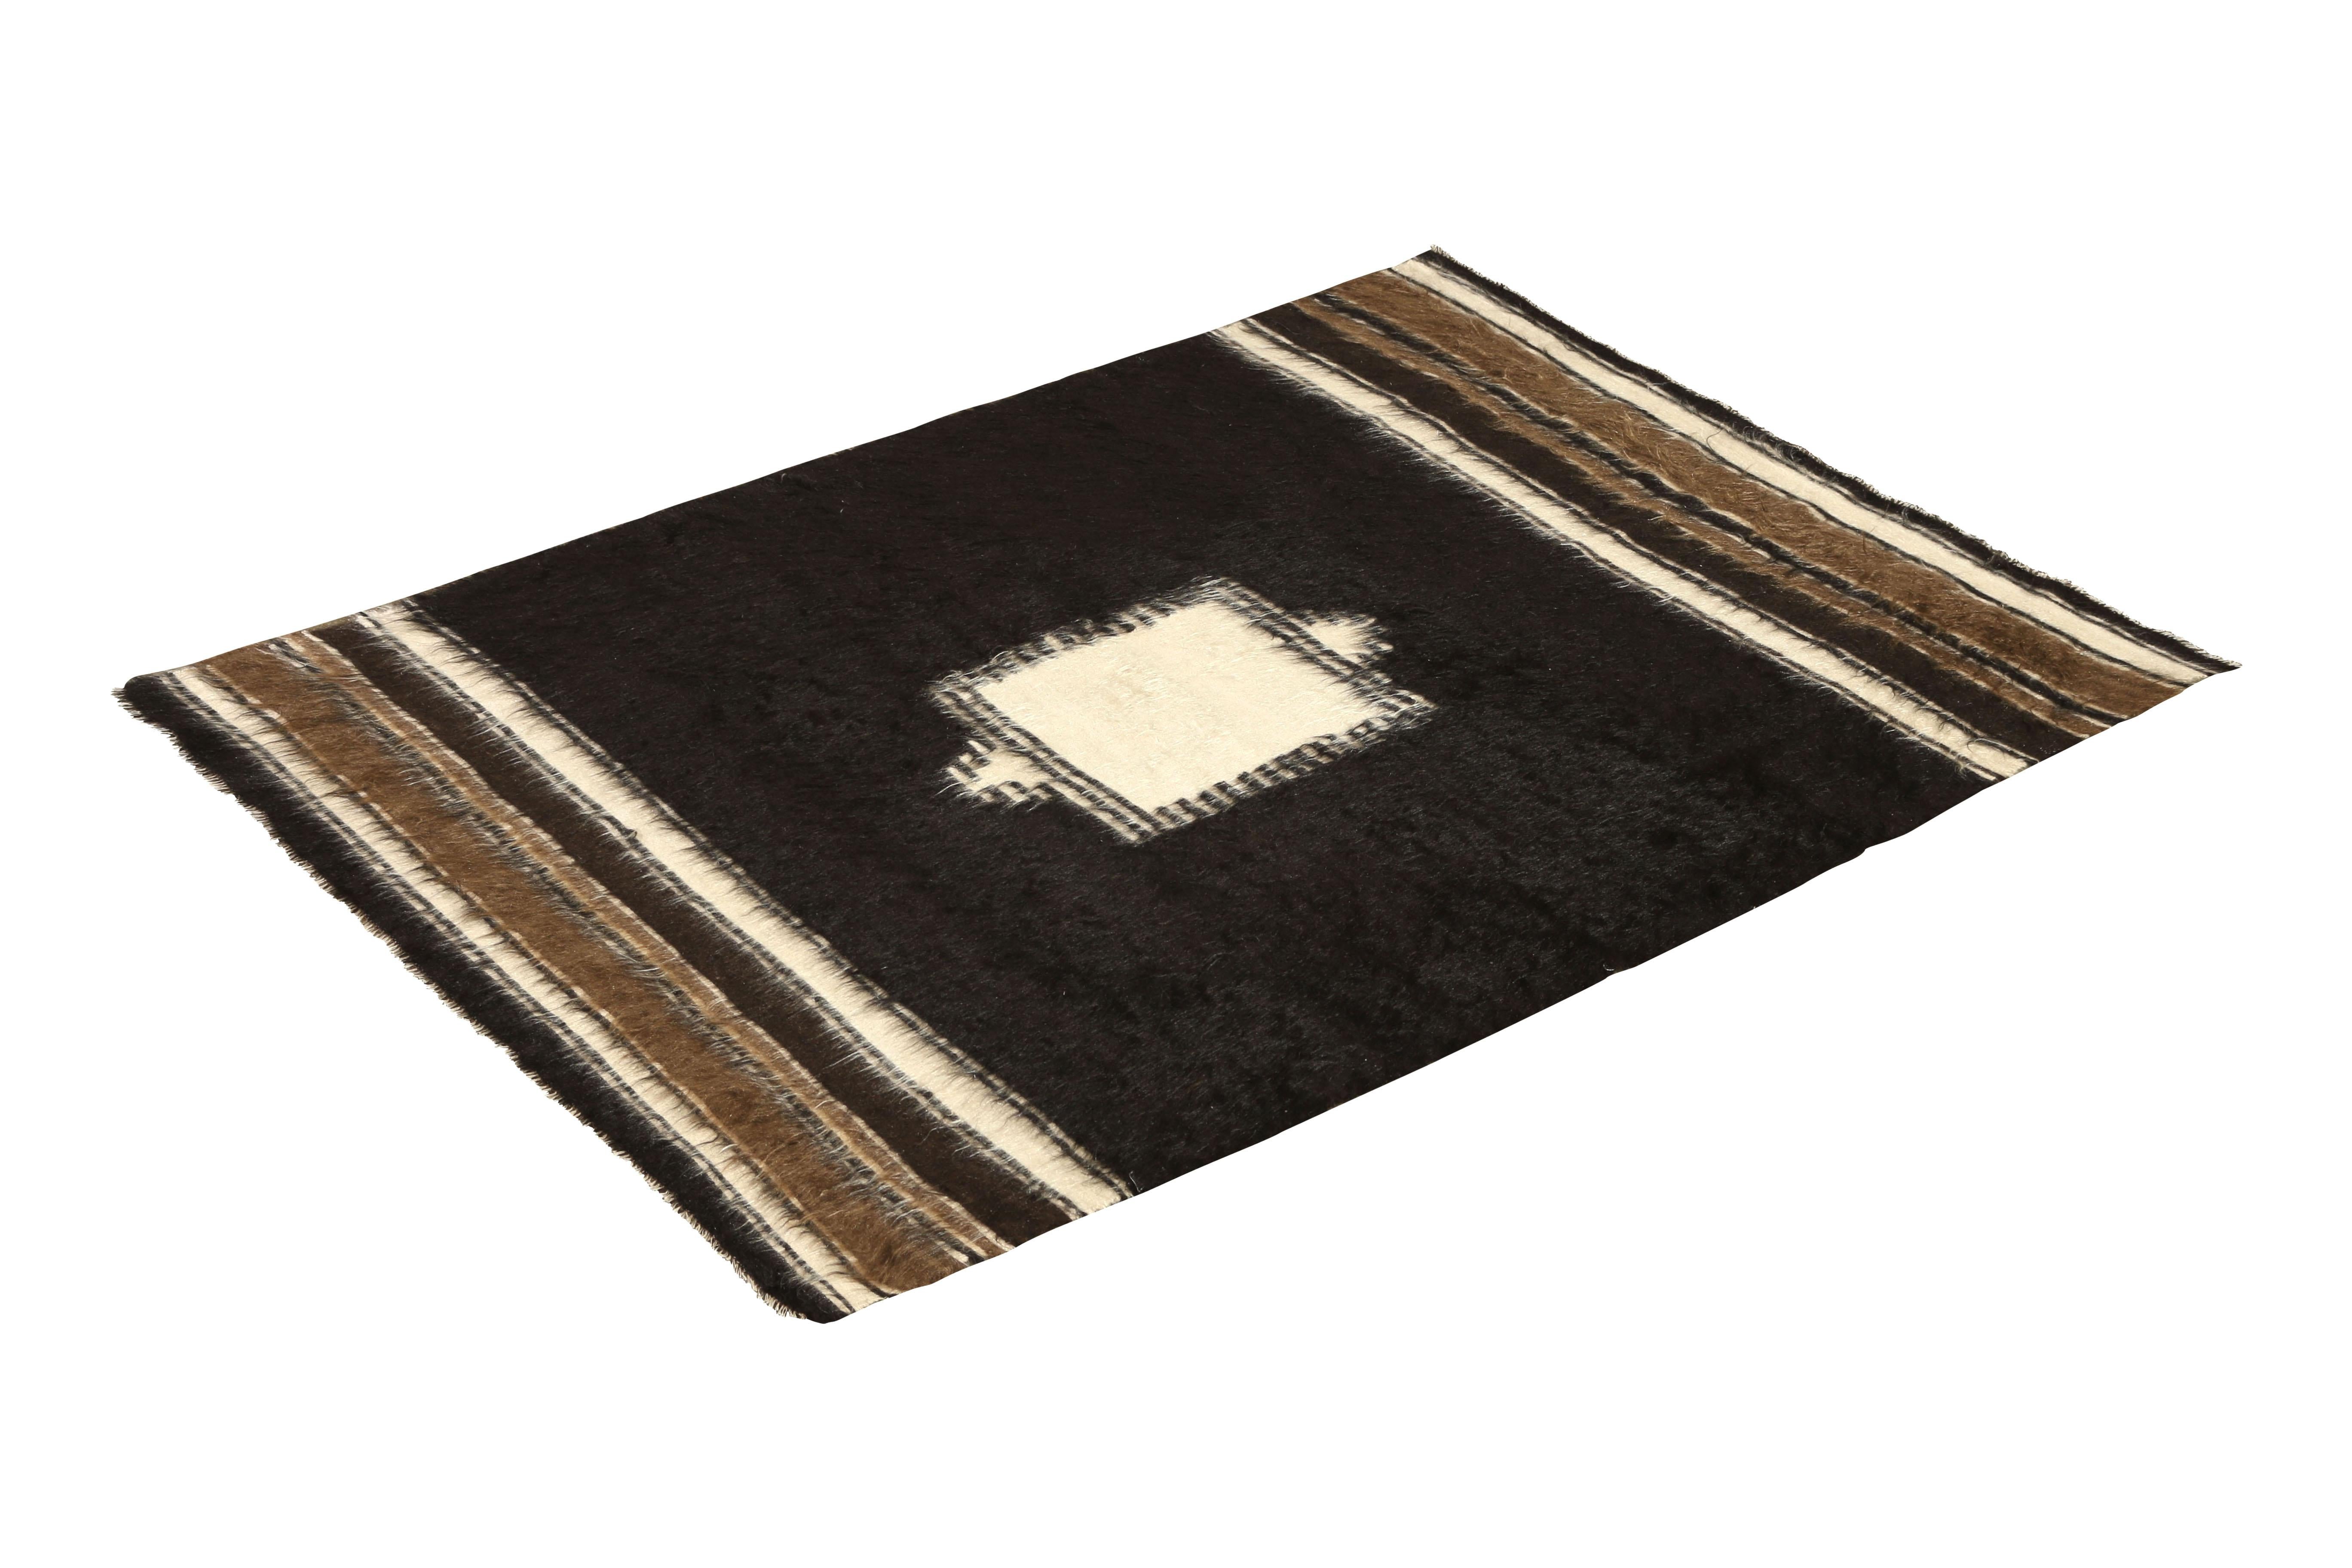 Handwoven in wool originating from Turkey circa 1950-1960, this midcentury vintage Kilim enjoys the combination of multiple rare design features, particularly a special yarn creating the almost shag texture in the field and striped borders as well